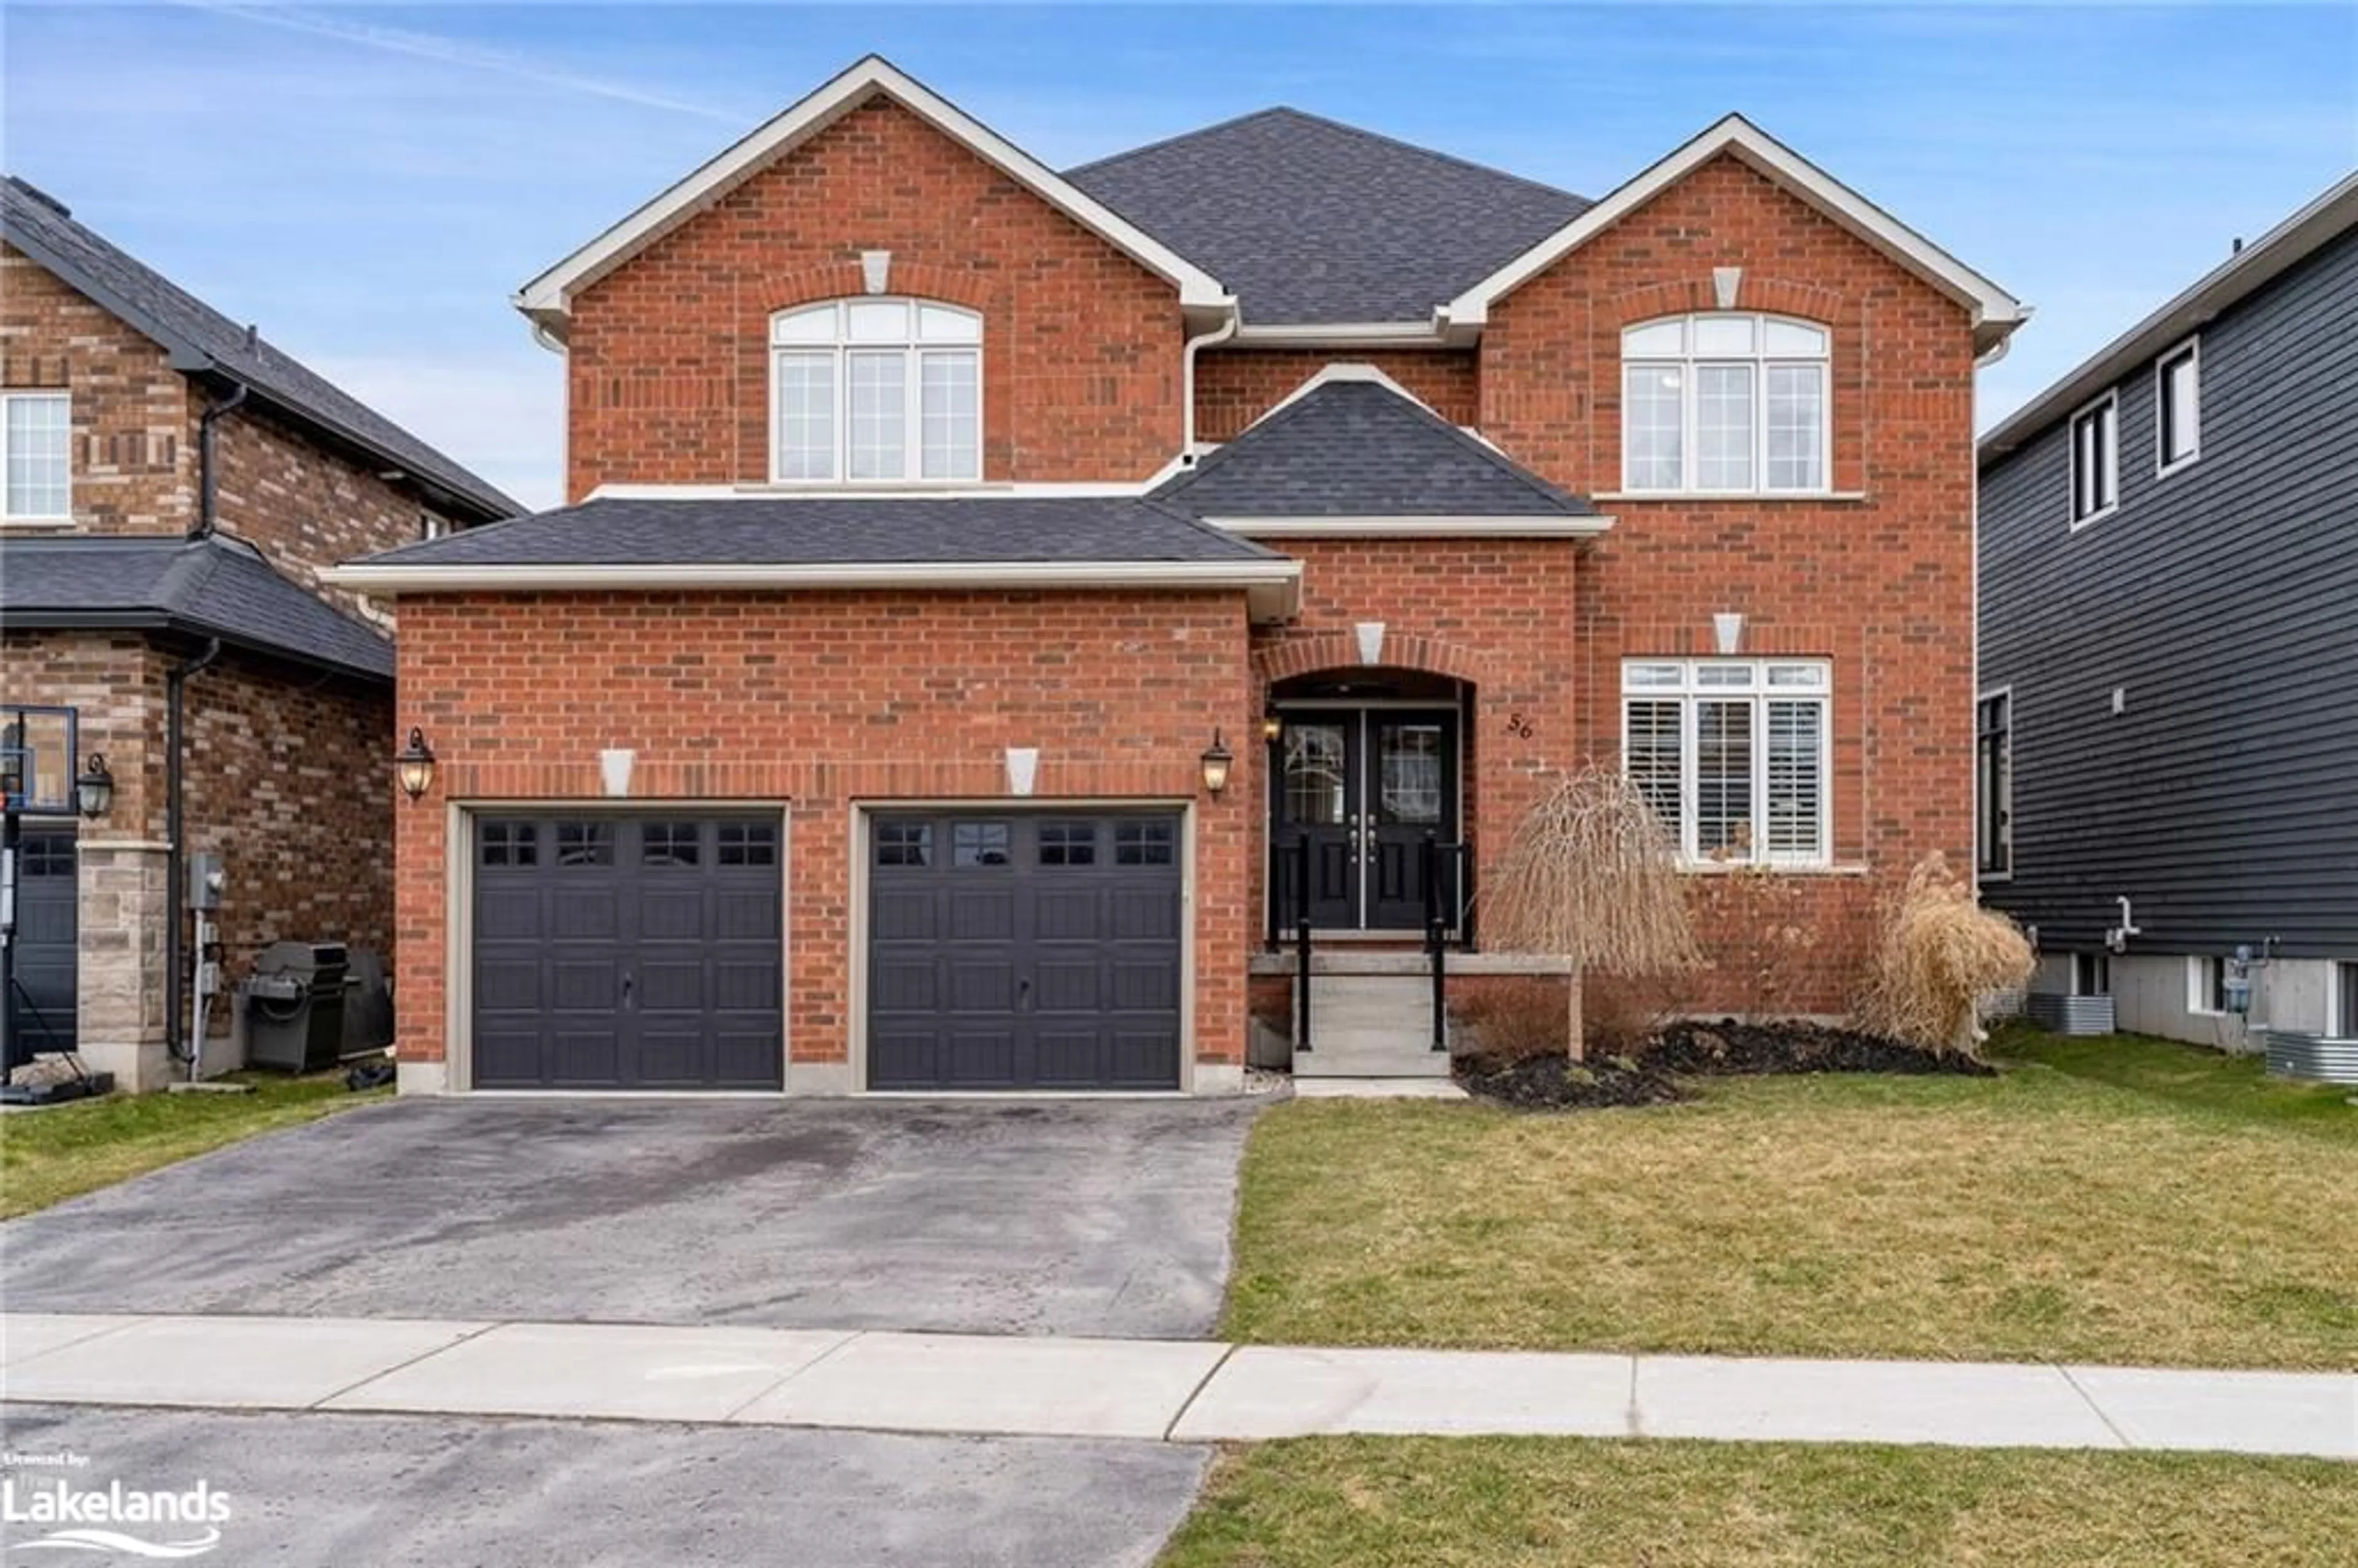 Home with brick exterior material for 56 Lockerbie Cres, Collingwood Ontario L9Y 4S1